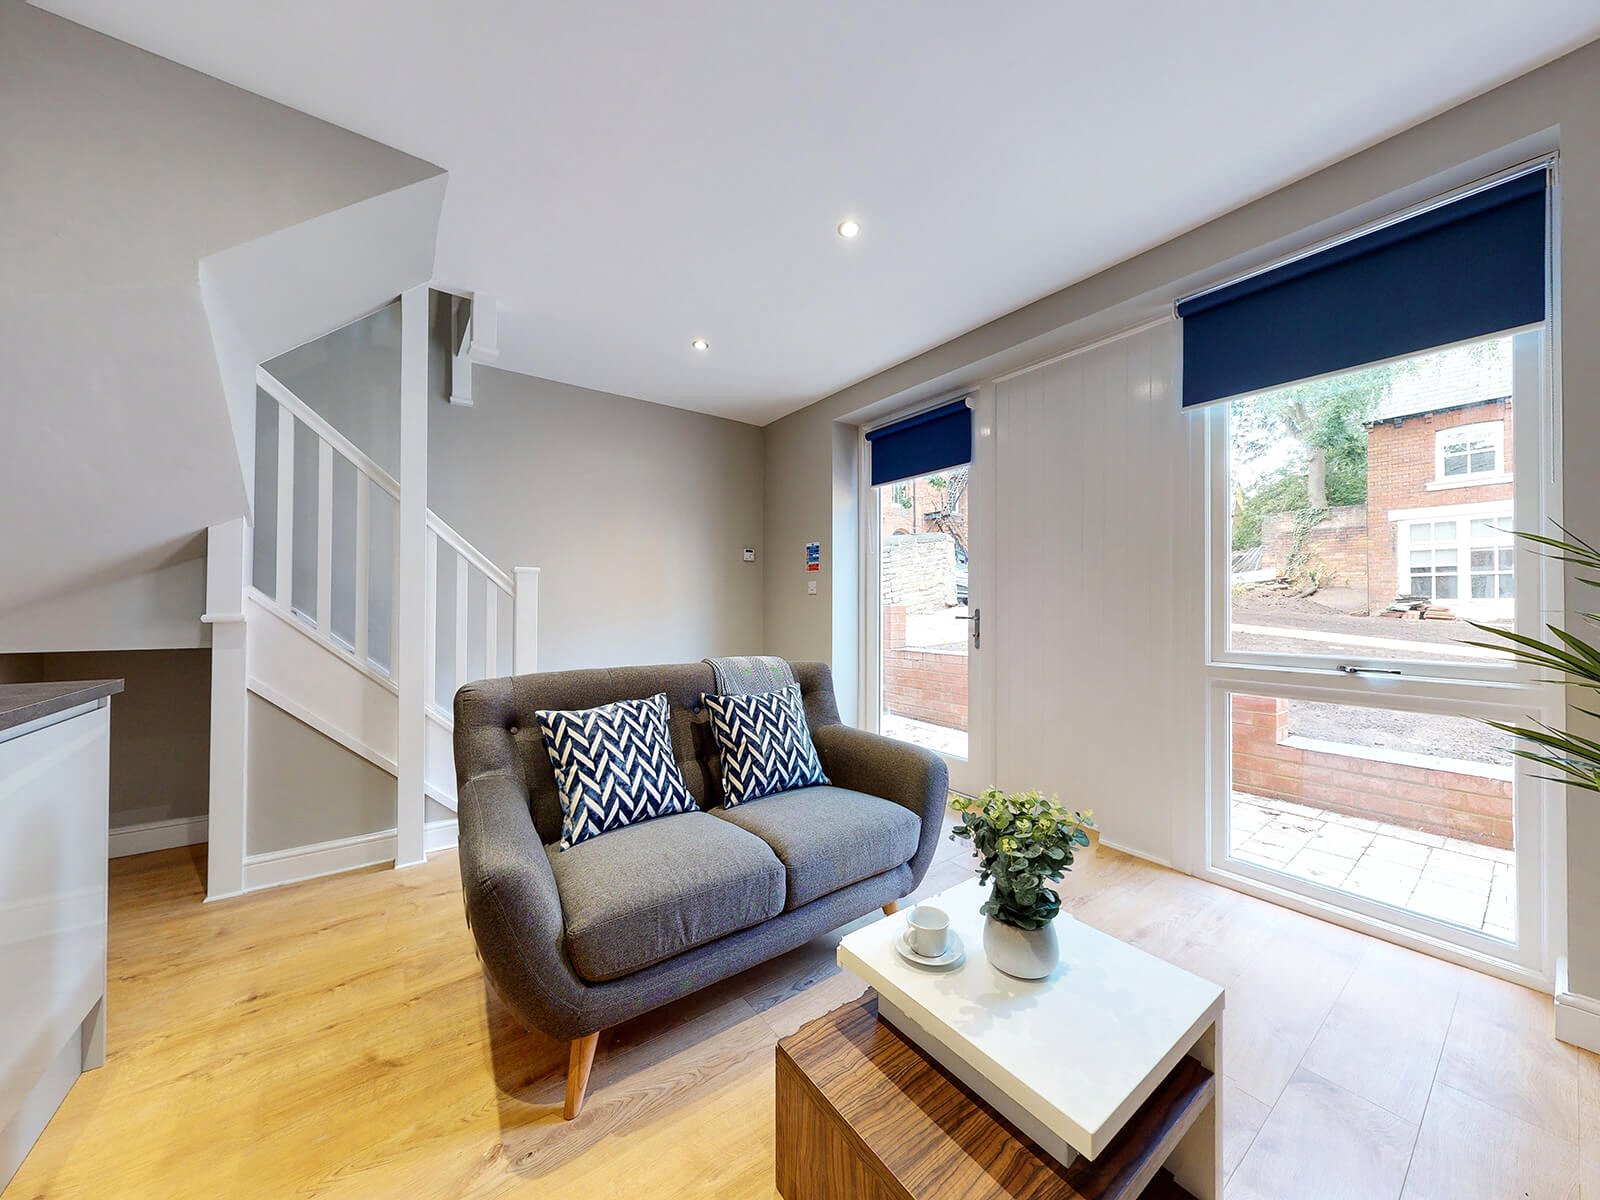 1 bed apartment for rent in Leeds. From YPP - Leeds